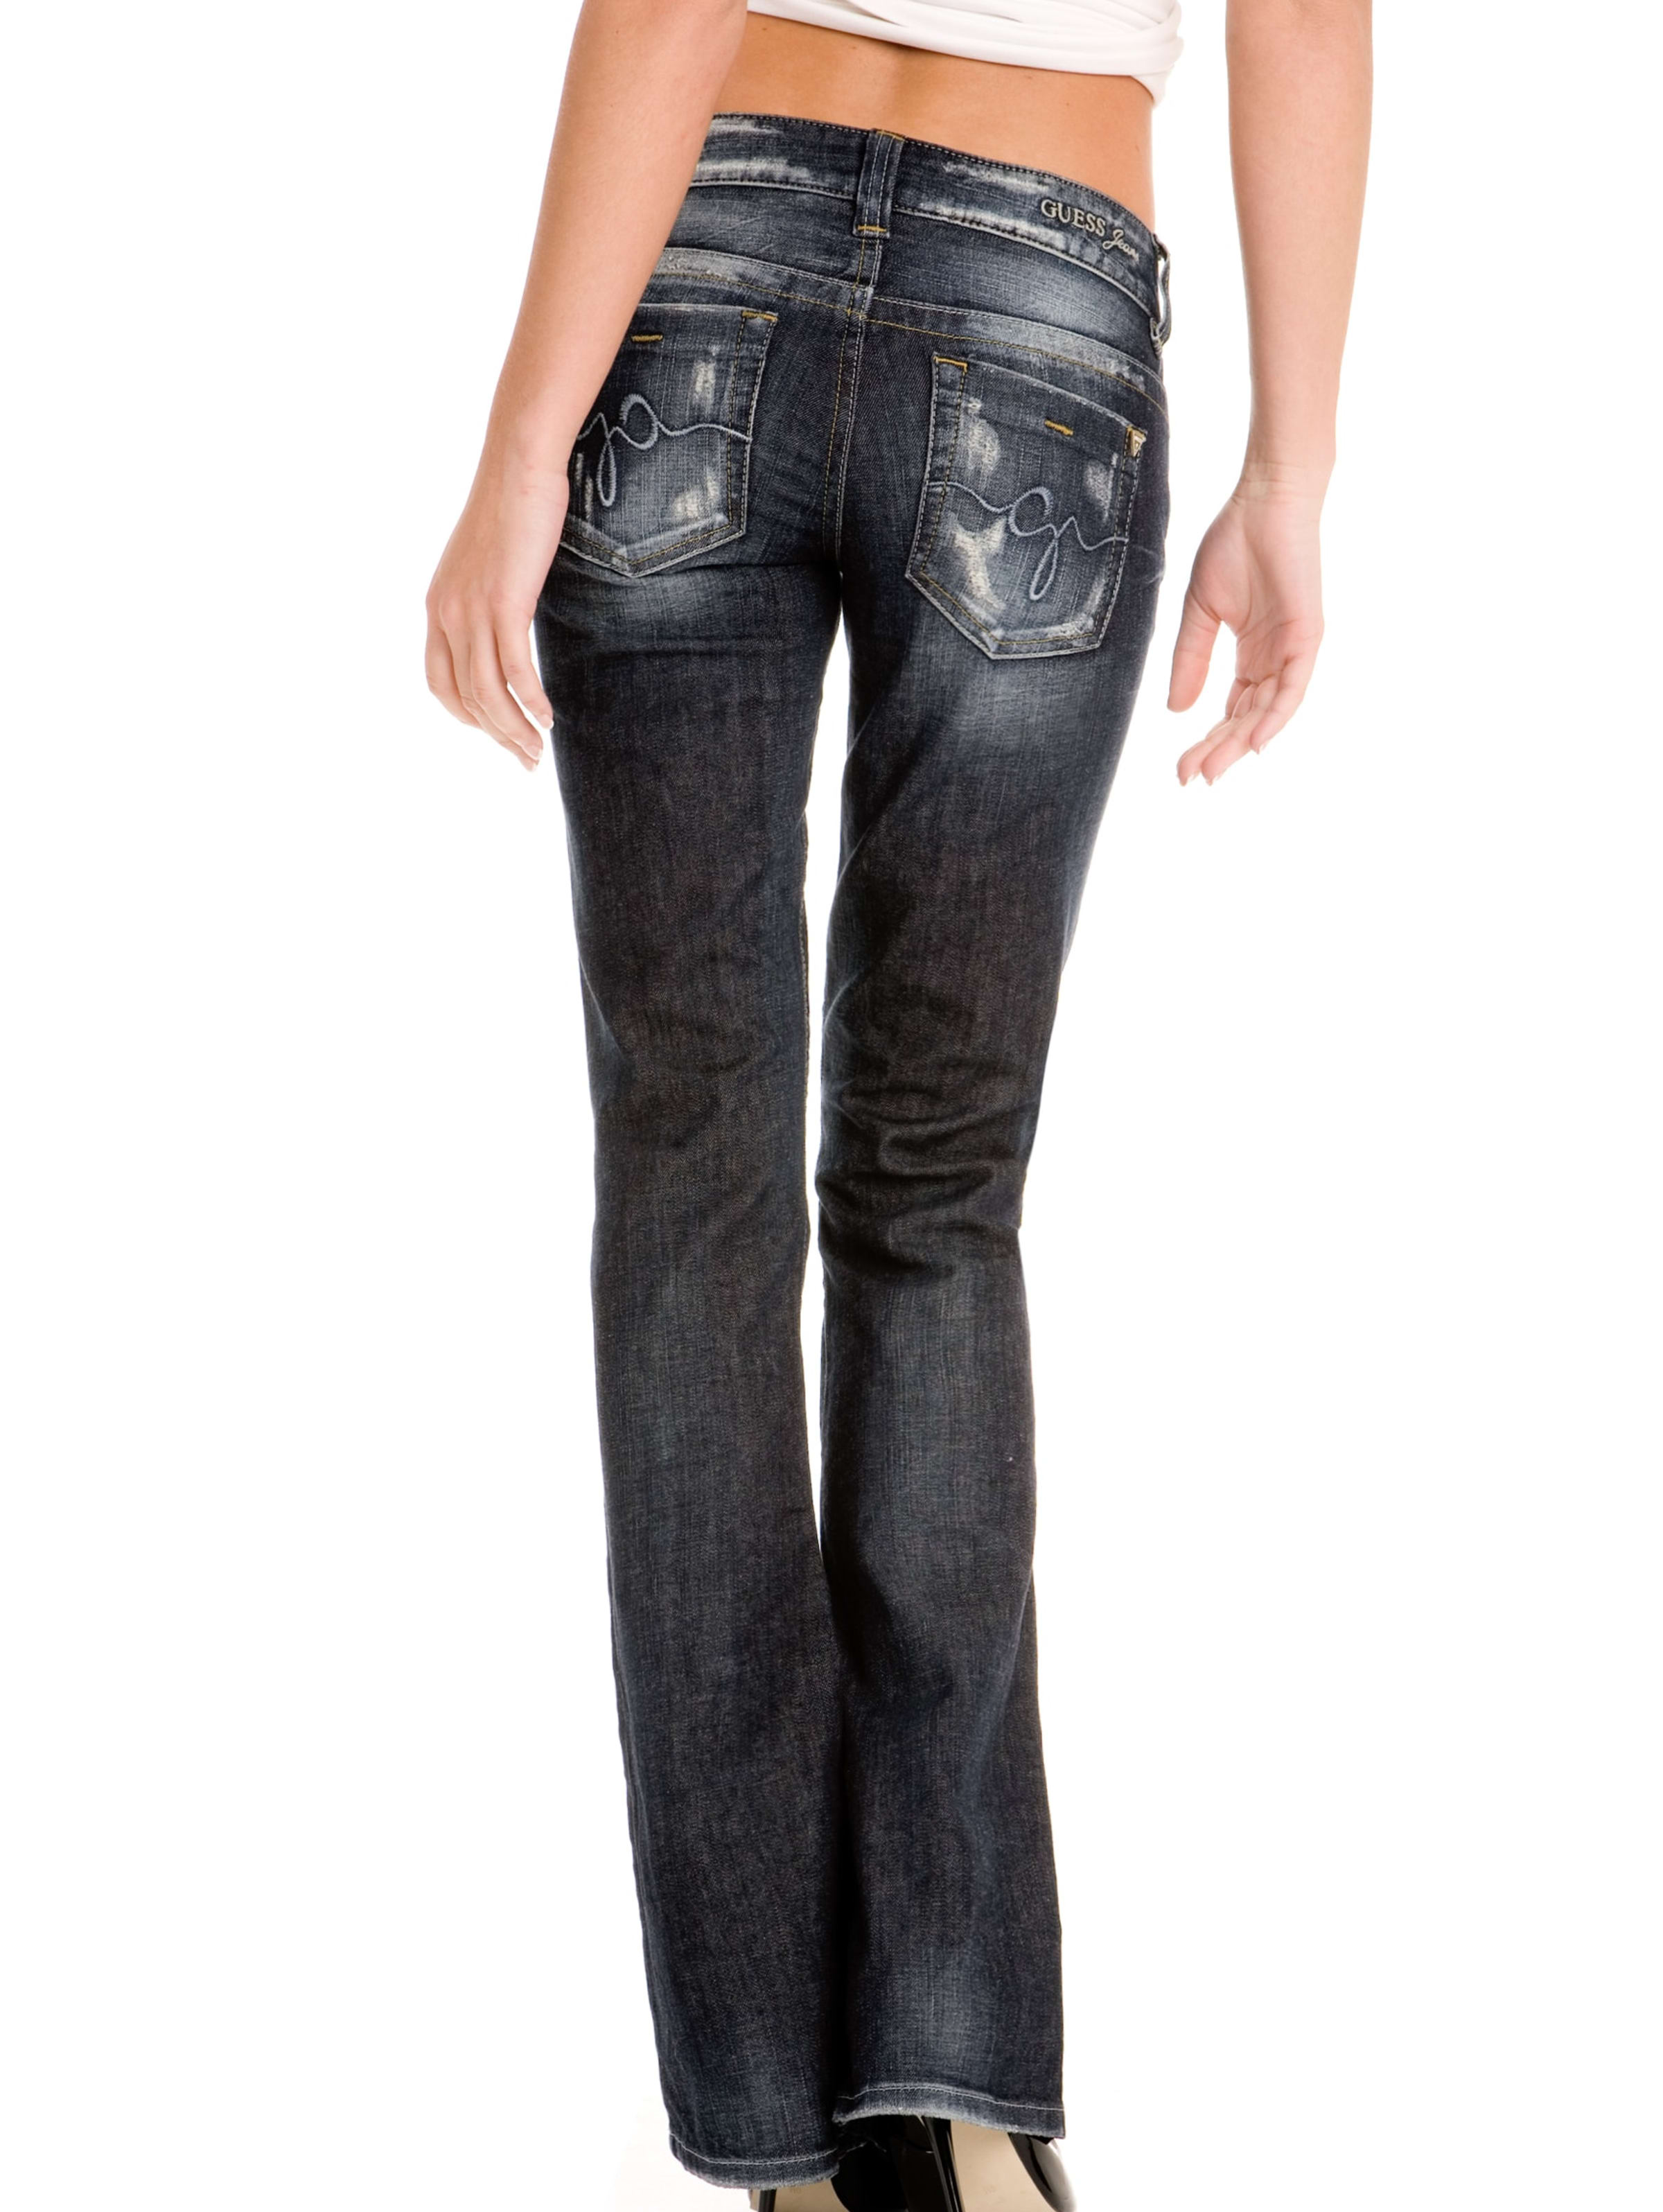 guess foxy flare jeans